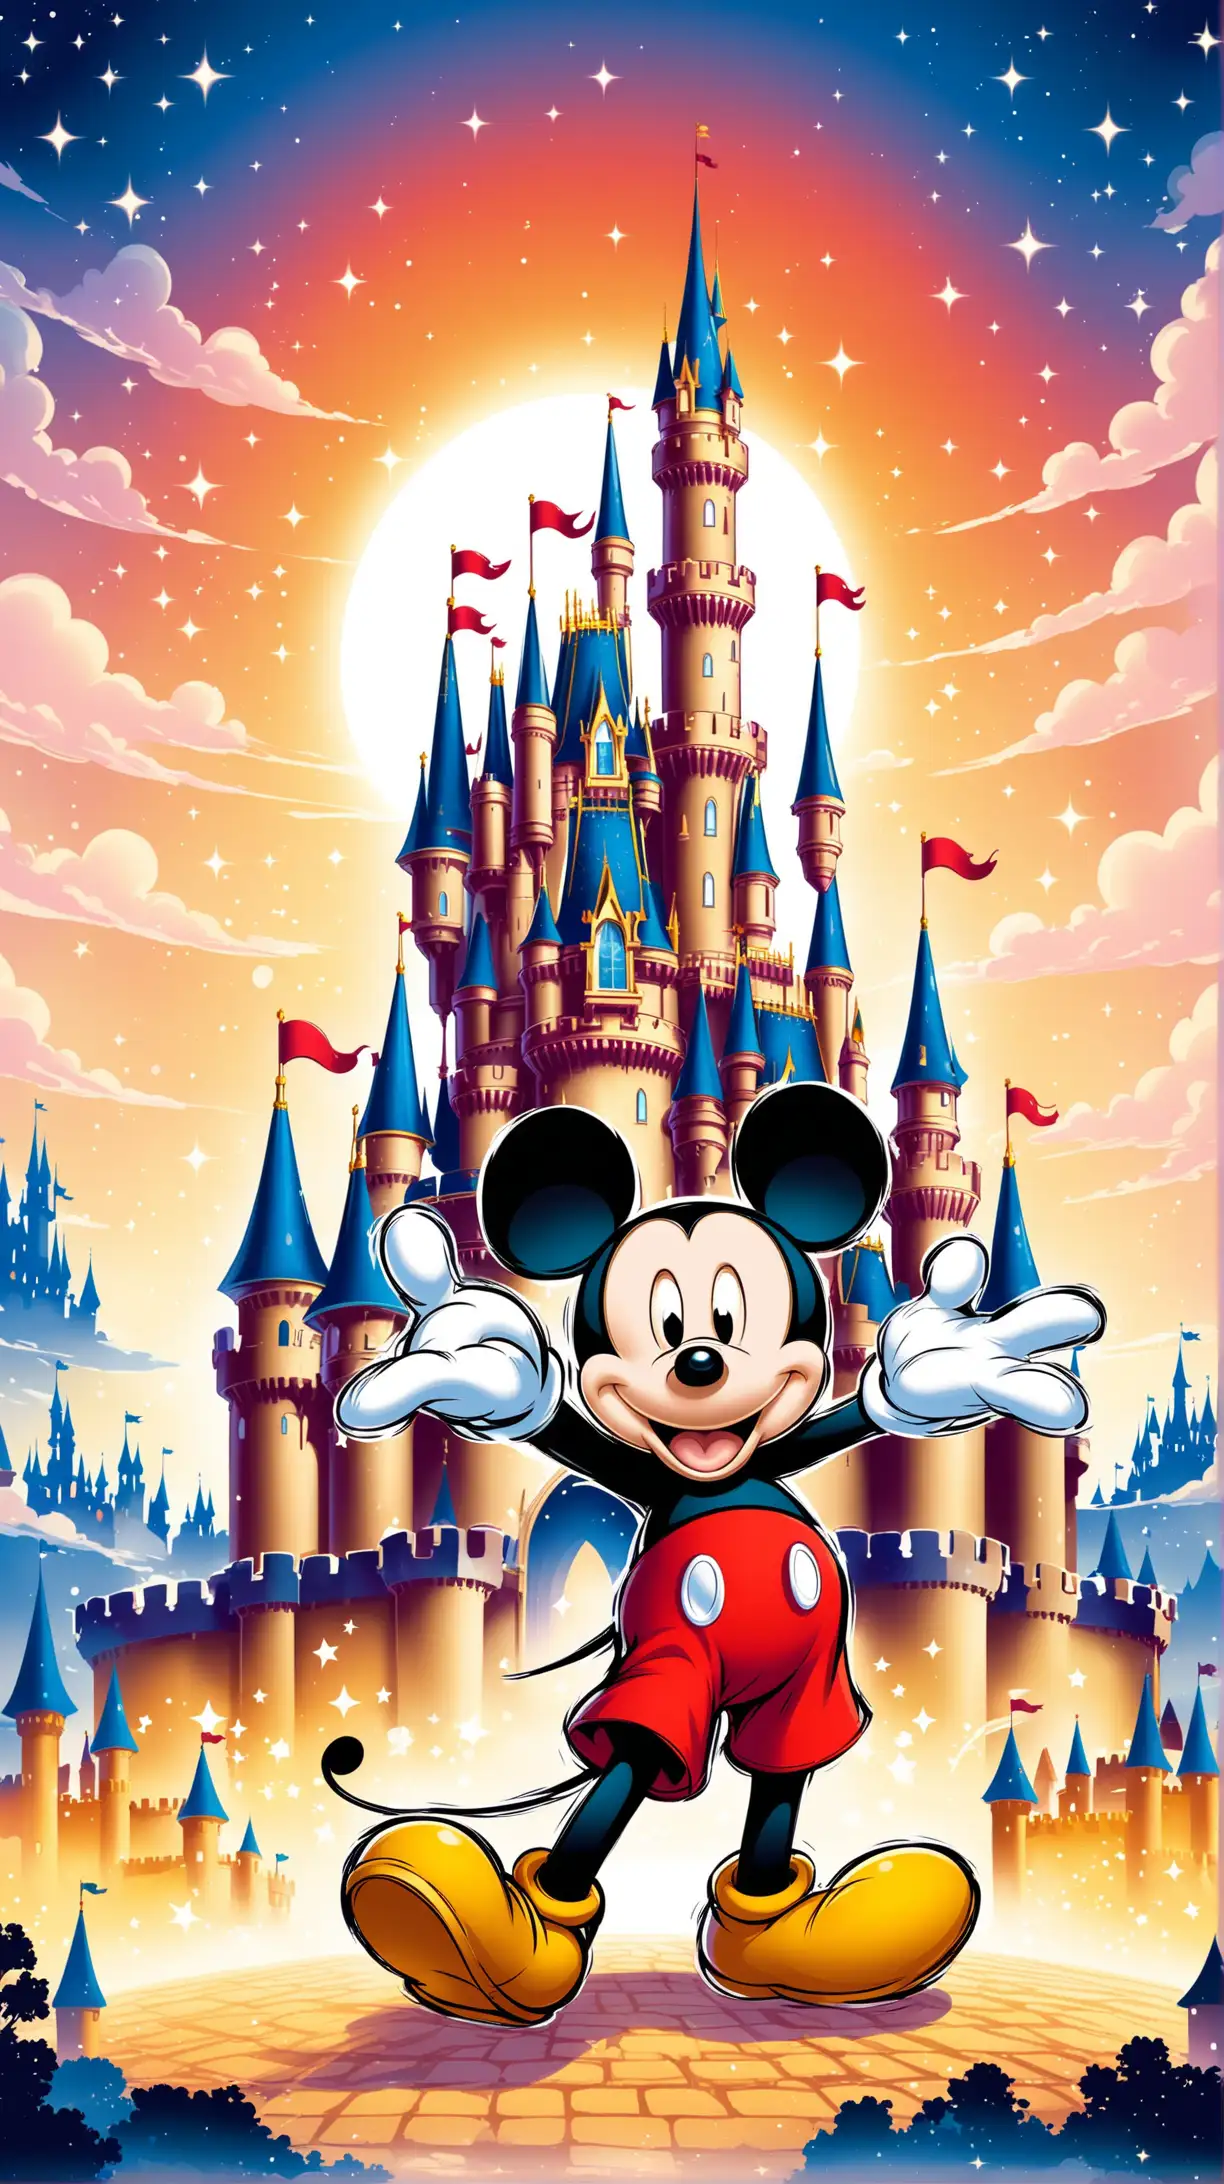 Mickey mouse with an ink brush vector. Magic castle background 